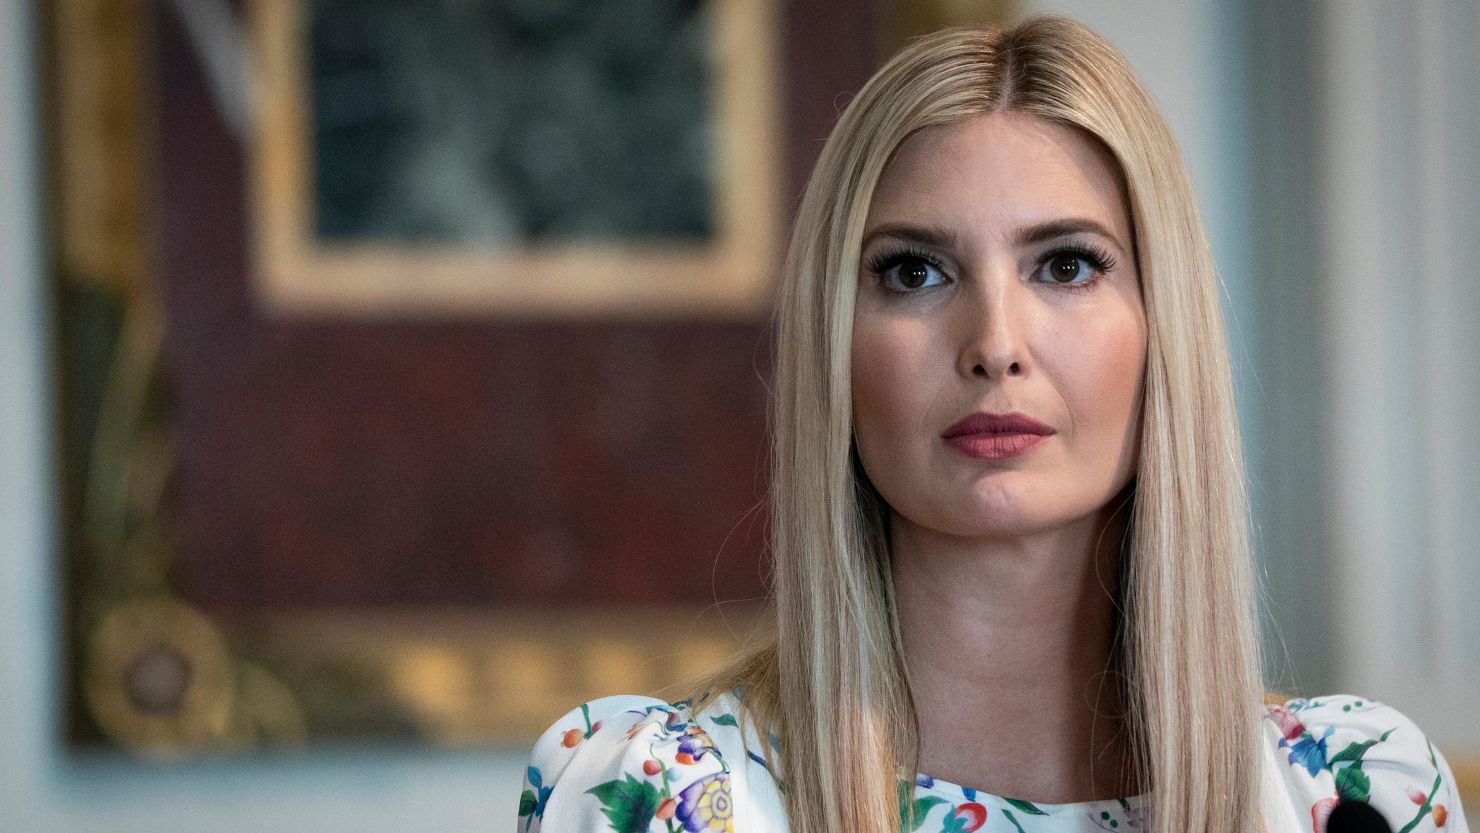 Ivanka Trump listens during an event in the Indian Treaty Room of the Eisenhower Executive Office Building on August 4, 2020, in Washington, DC.